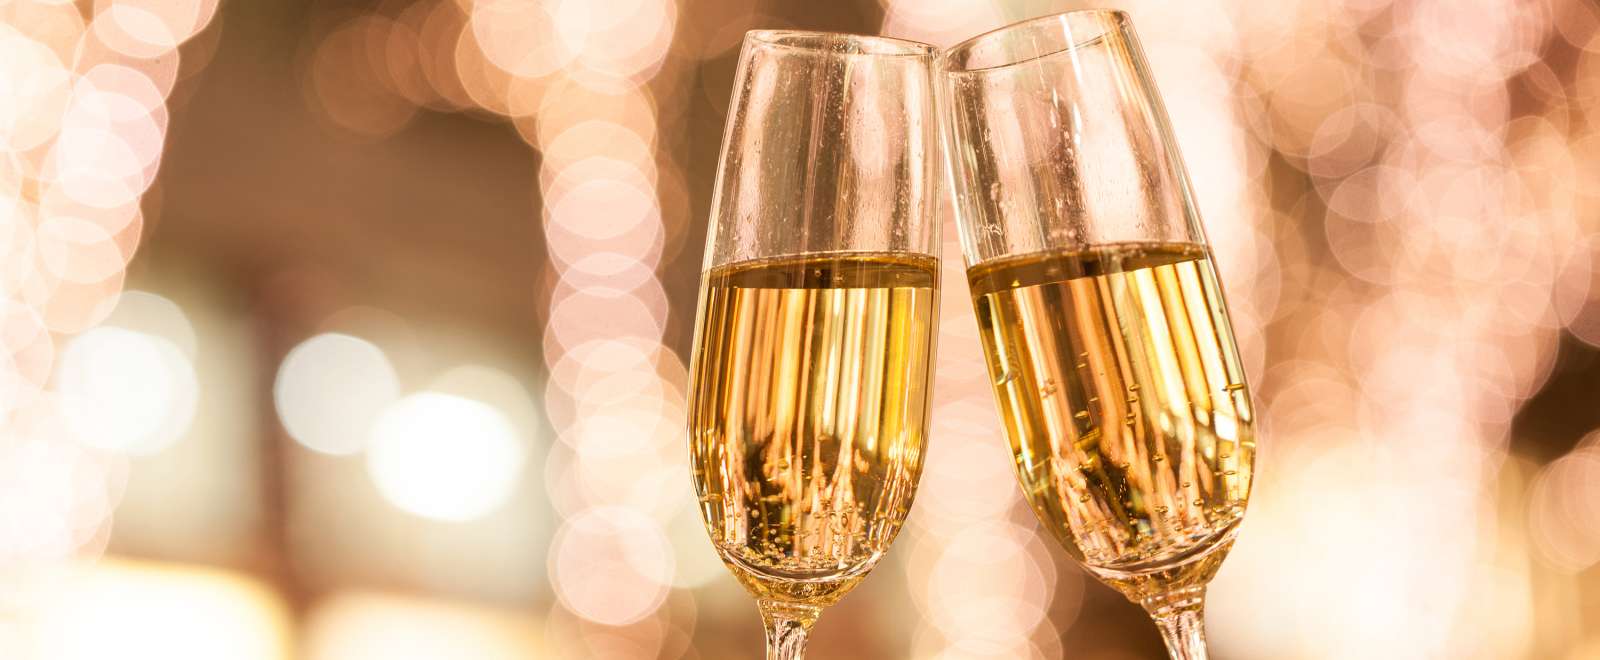 Champagne Glasses on bokeh background